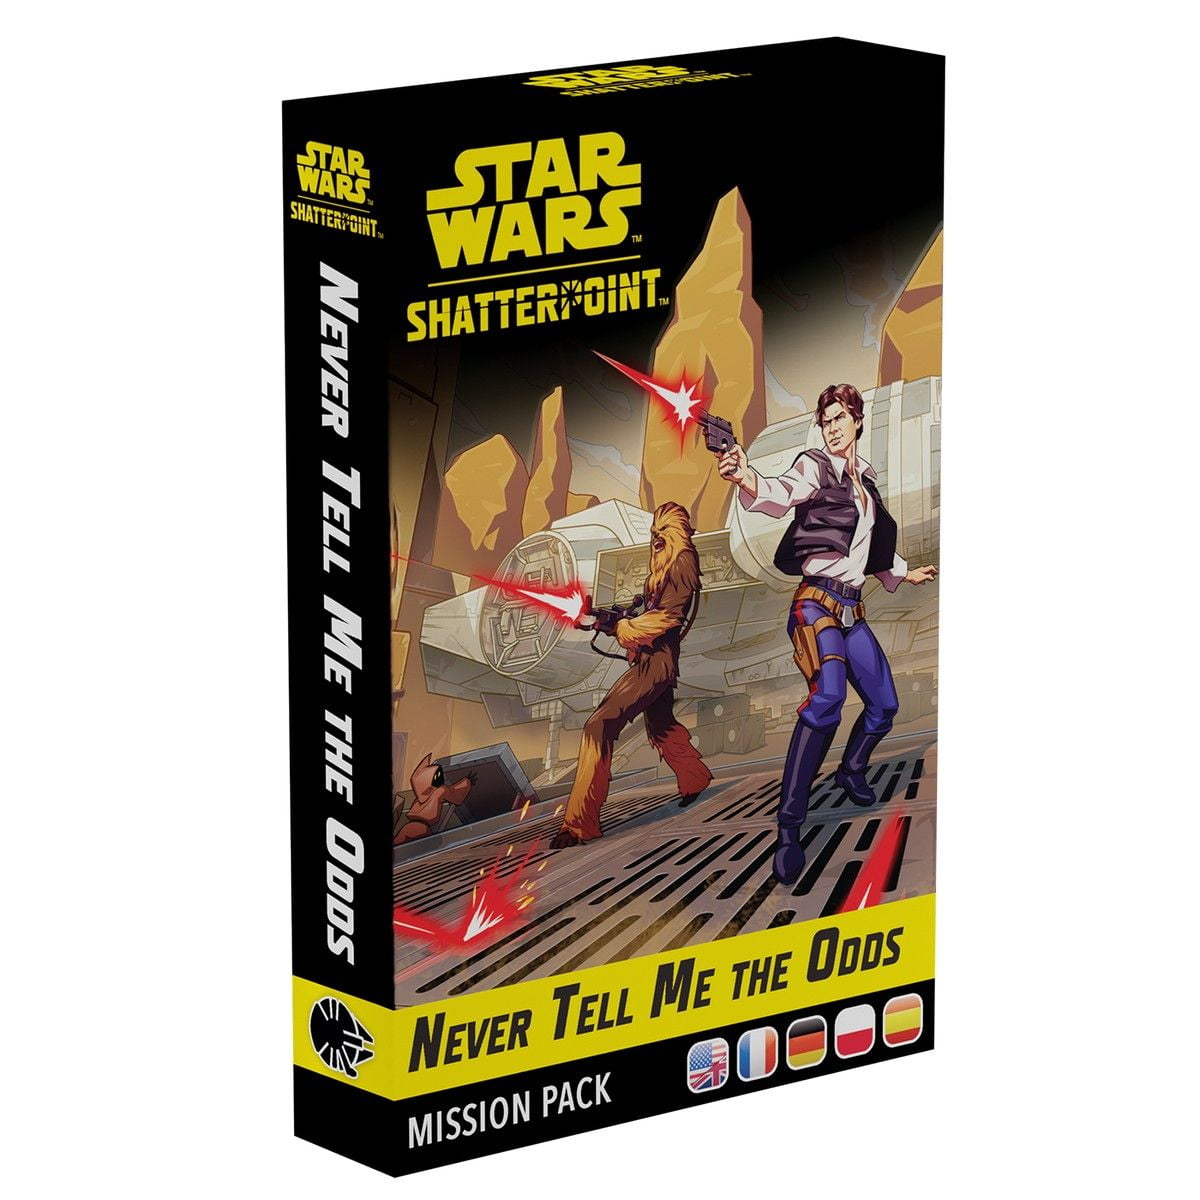 Star Wars: Shatterpoint: Never Tell Me The Odds Mission Pack